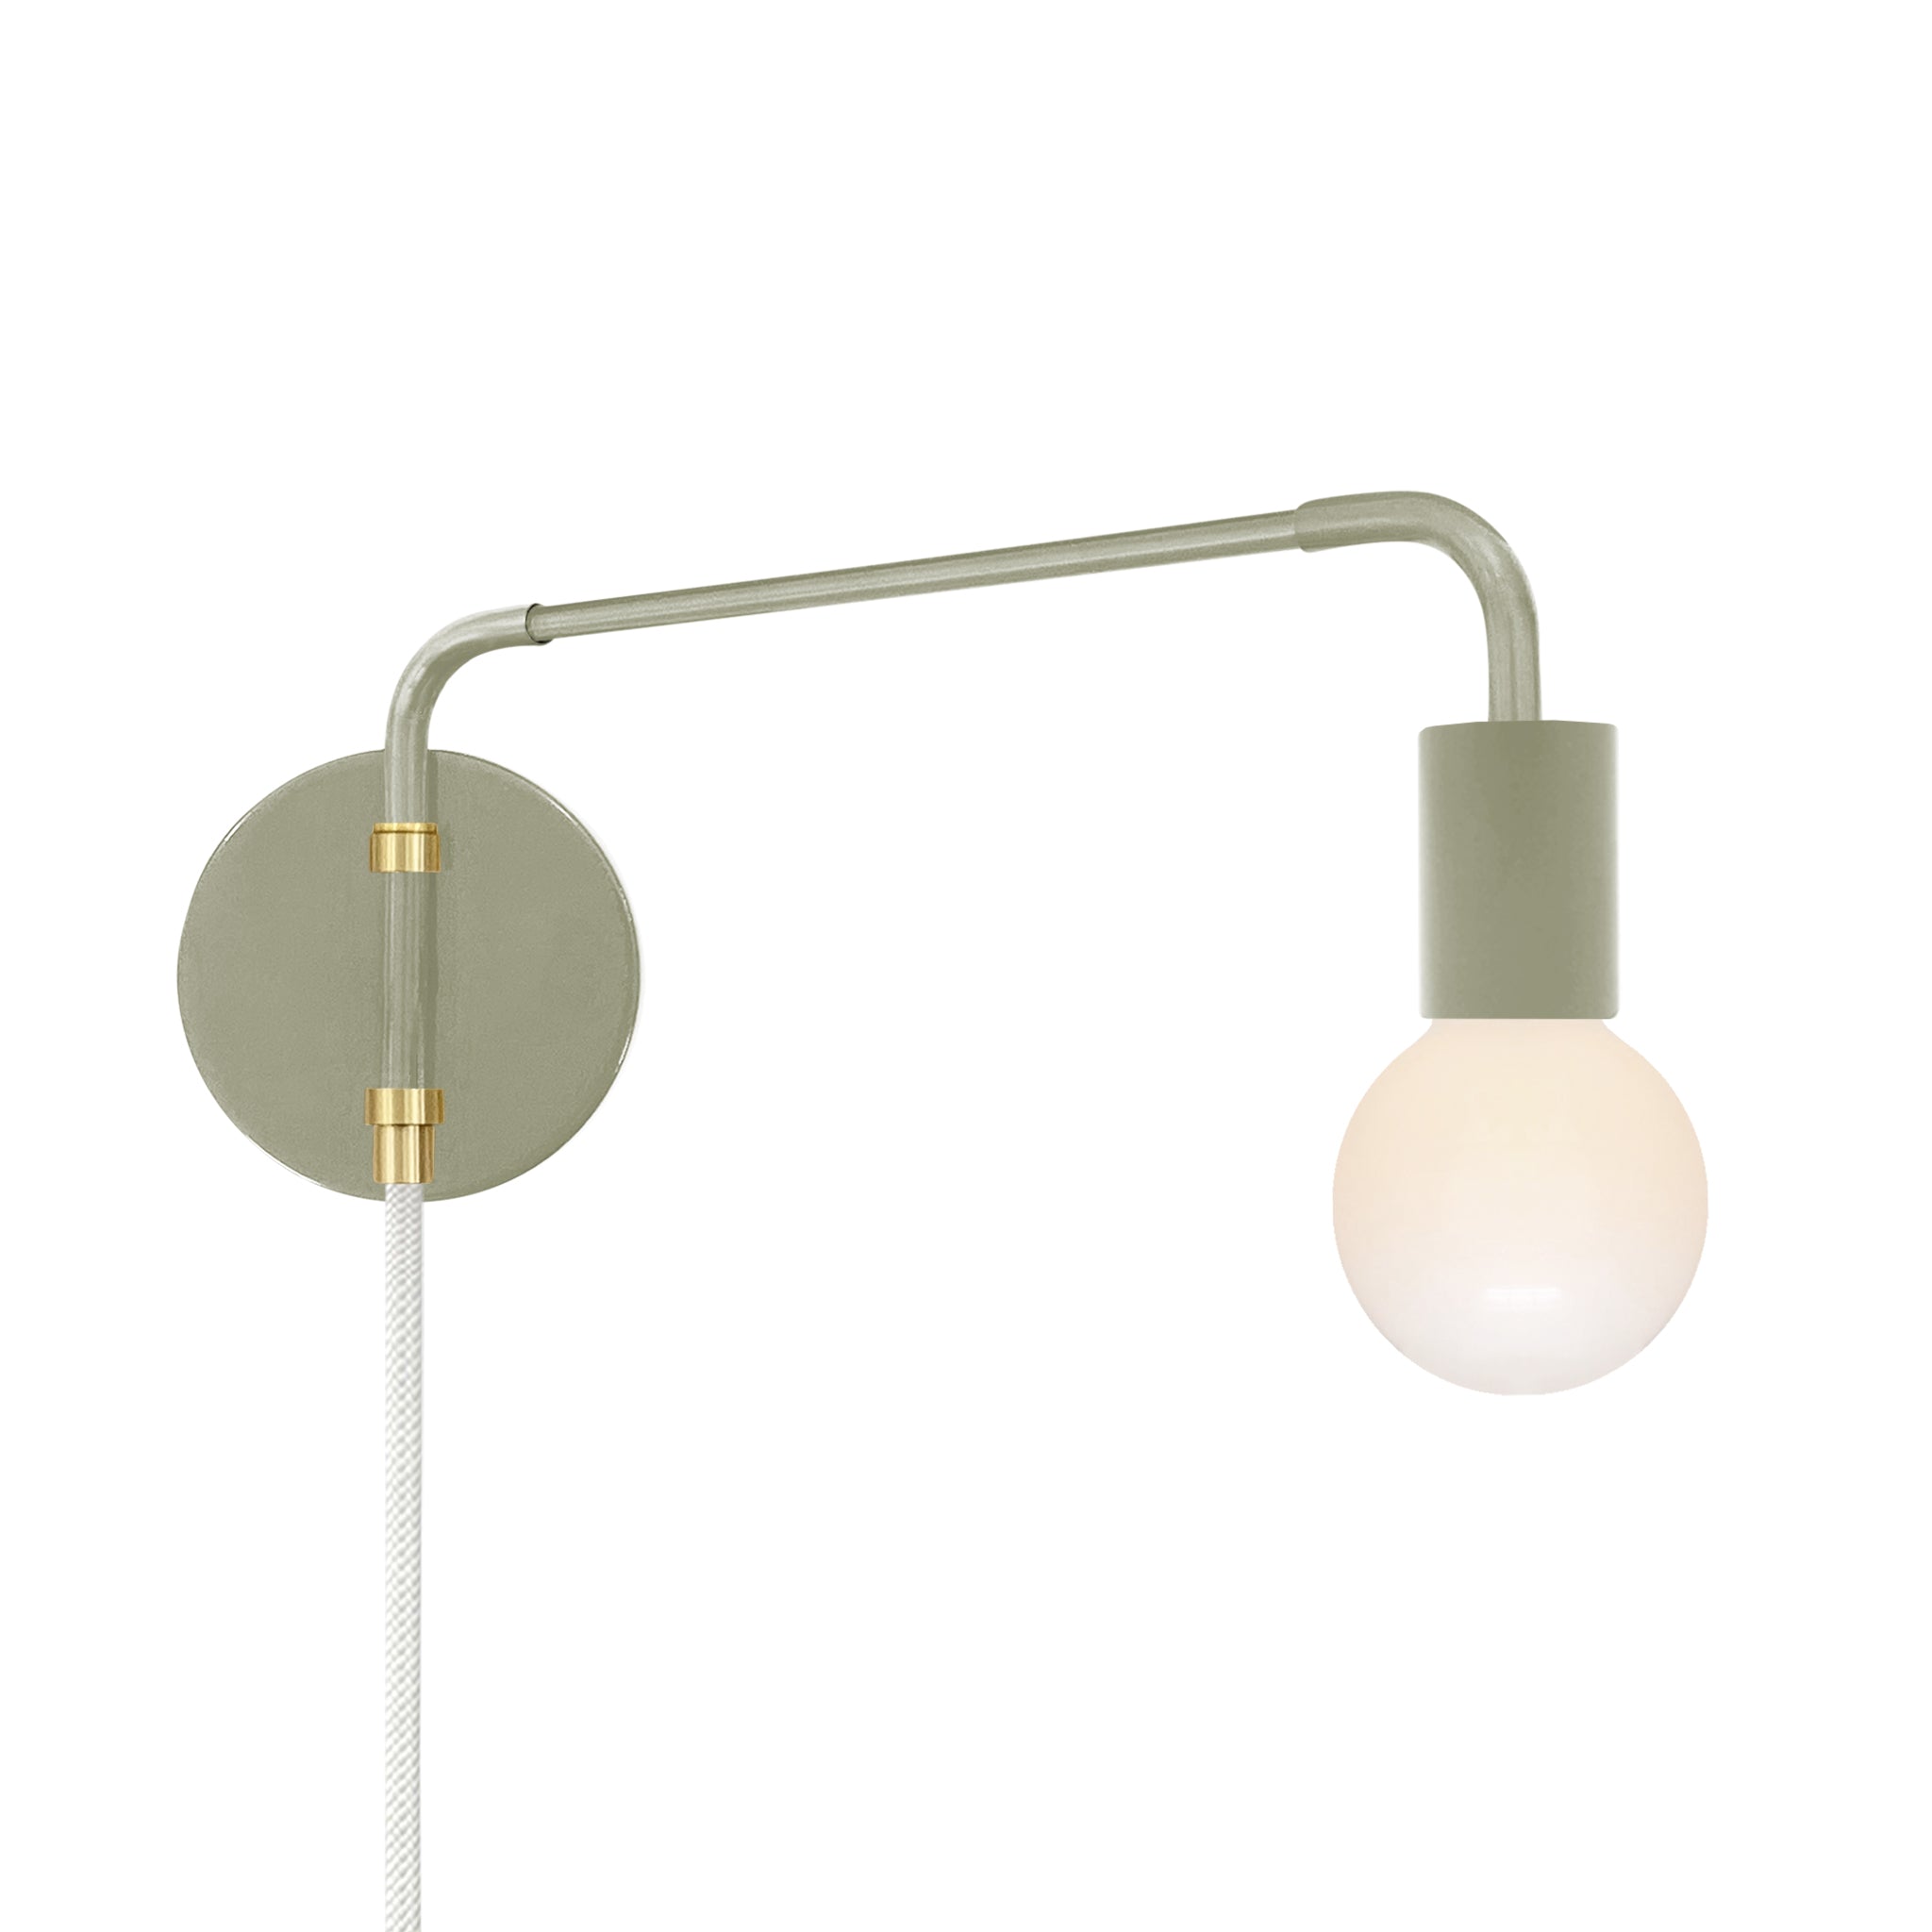 Brass and spa color Sway plug-in sconce Dutton Brown lighting